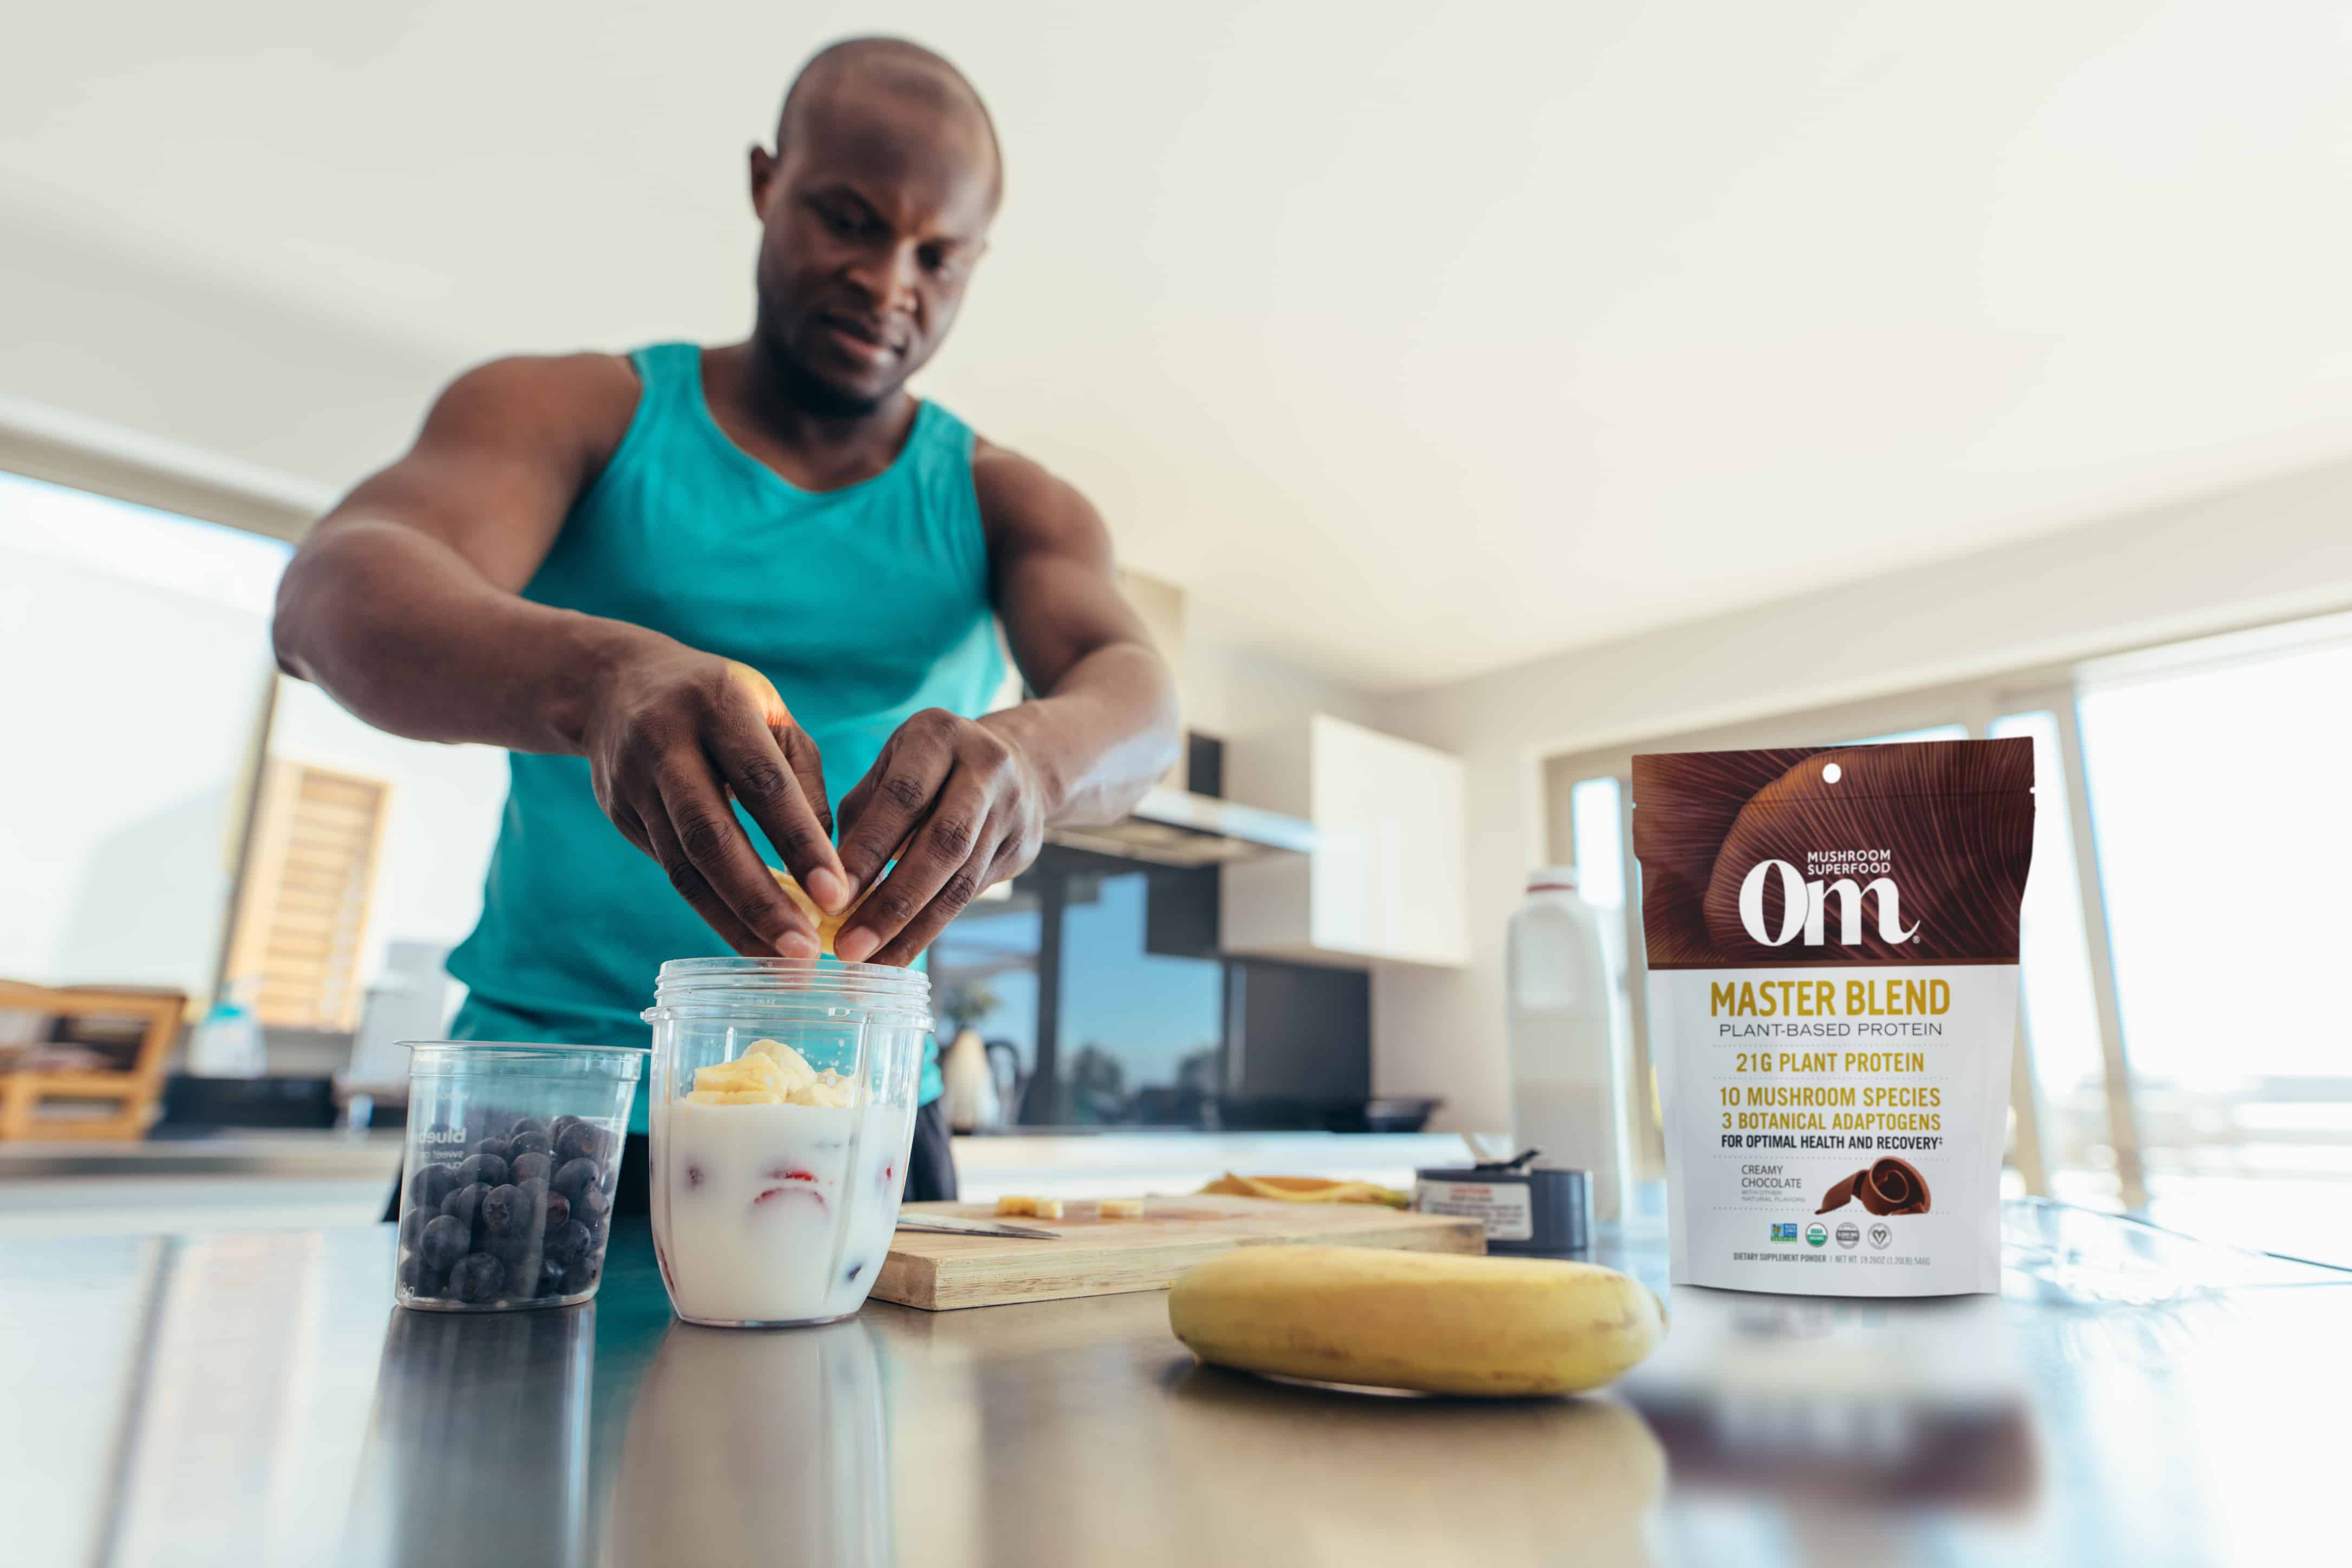 Man preparing protein shake with Om’s Master Blend’s mushroom benefits for muscle growth.